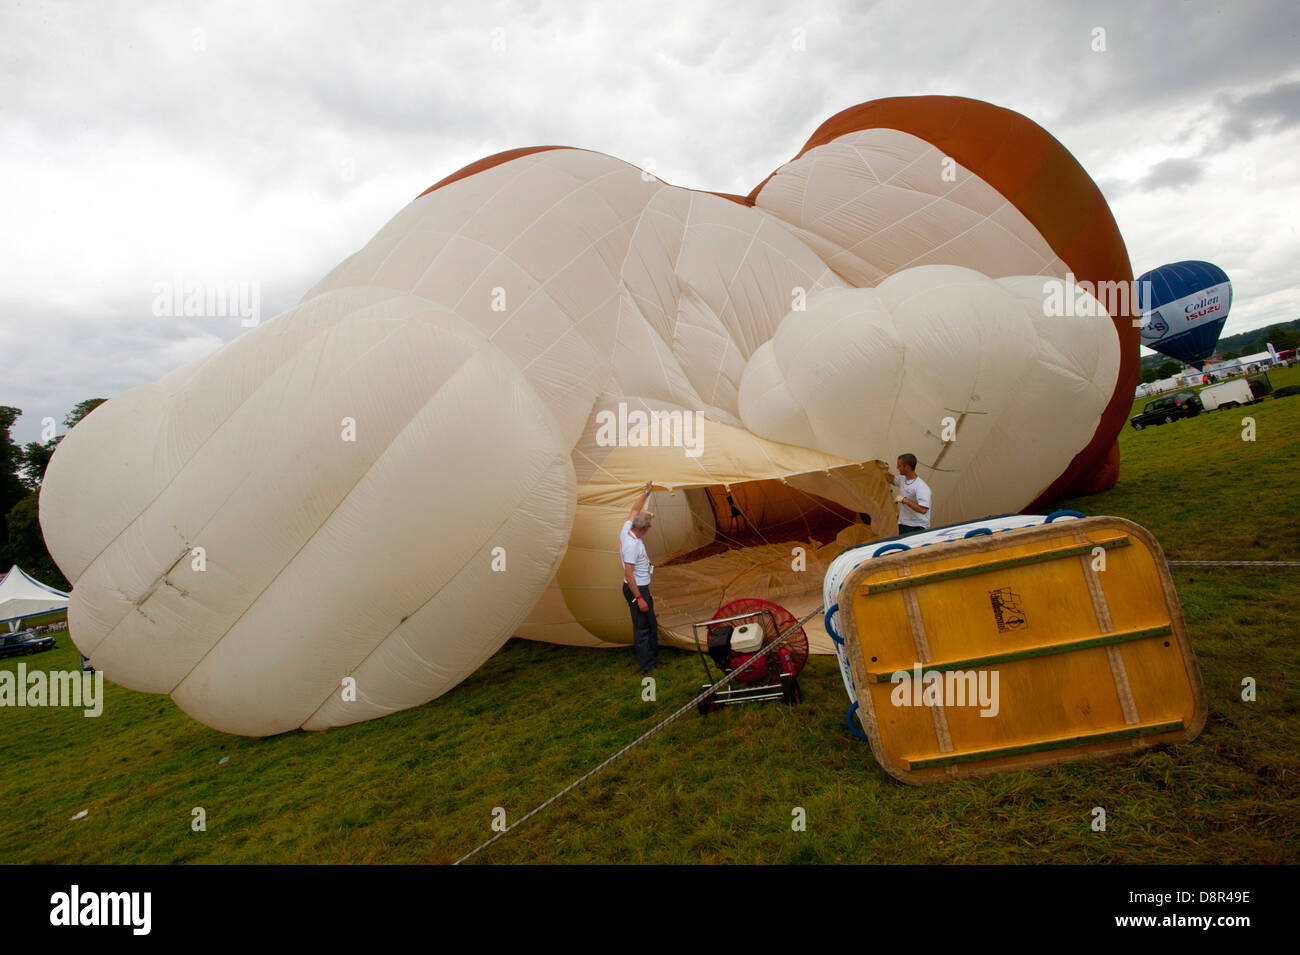 Churchill balloon being inflated Hot air balloons at the Bristol International Balloon Festival 2011 yesterday . Over 500 000 people are expected to attend the 4 day event at Ashton Court Estate. Stock Photo